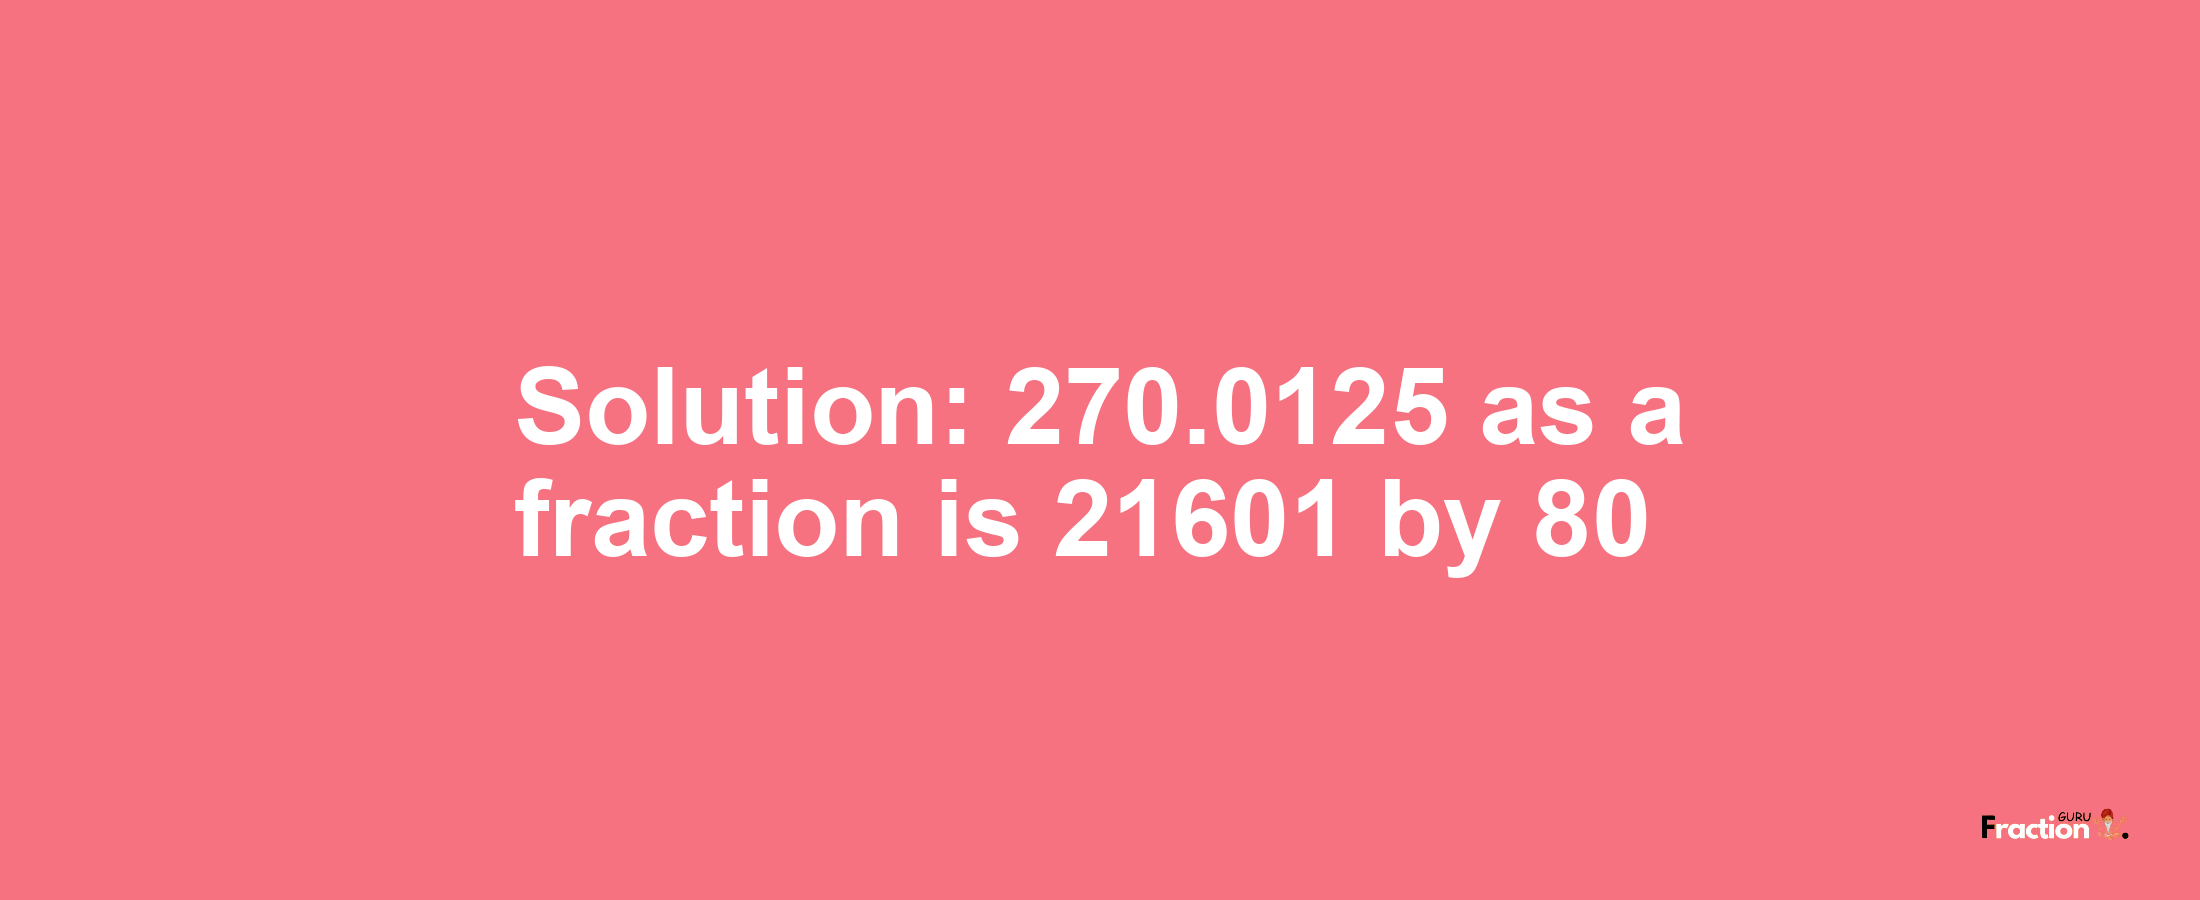 Solution:270.0125 as a fraction is 21601/80